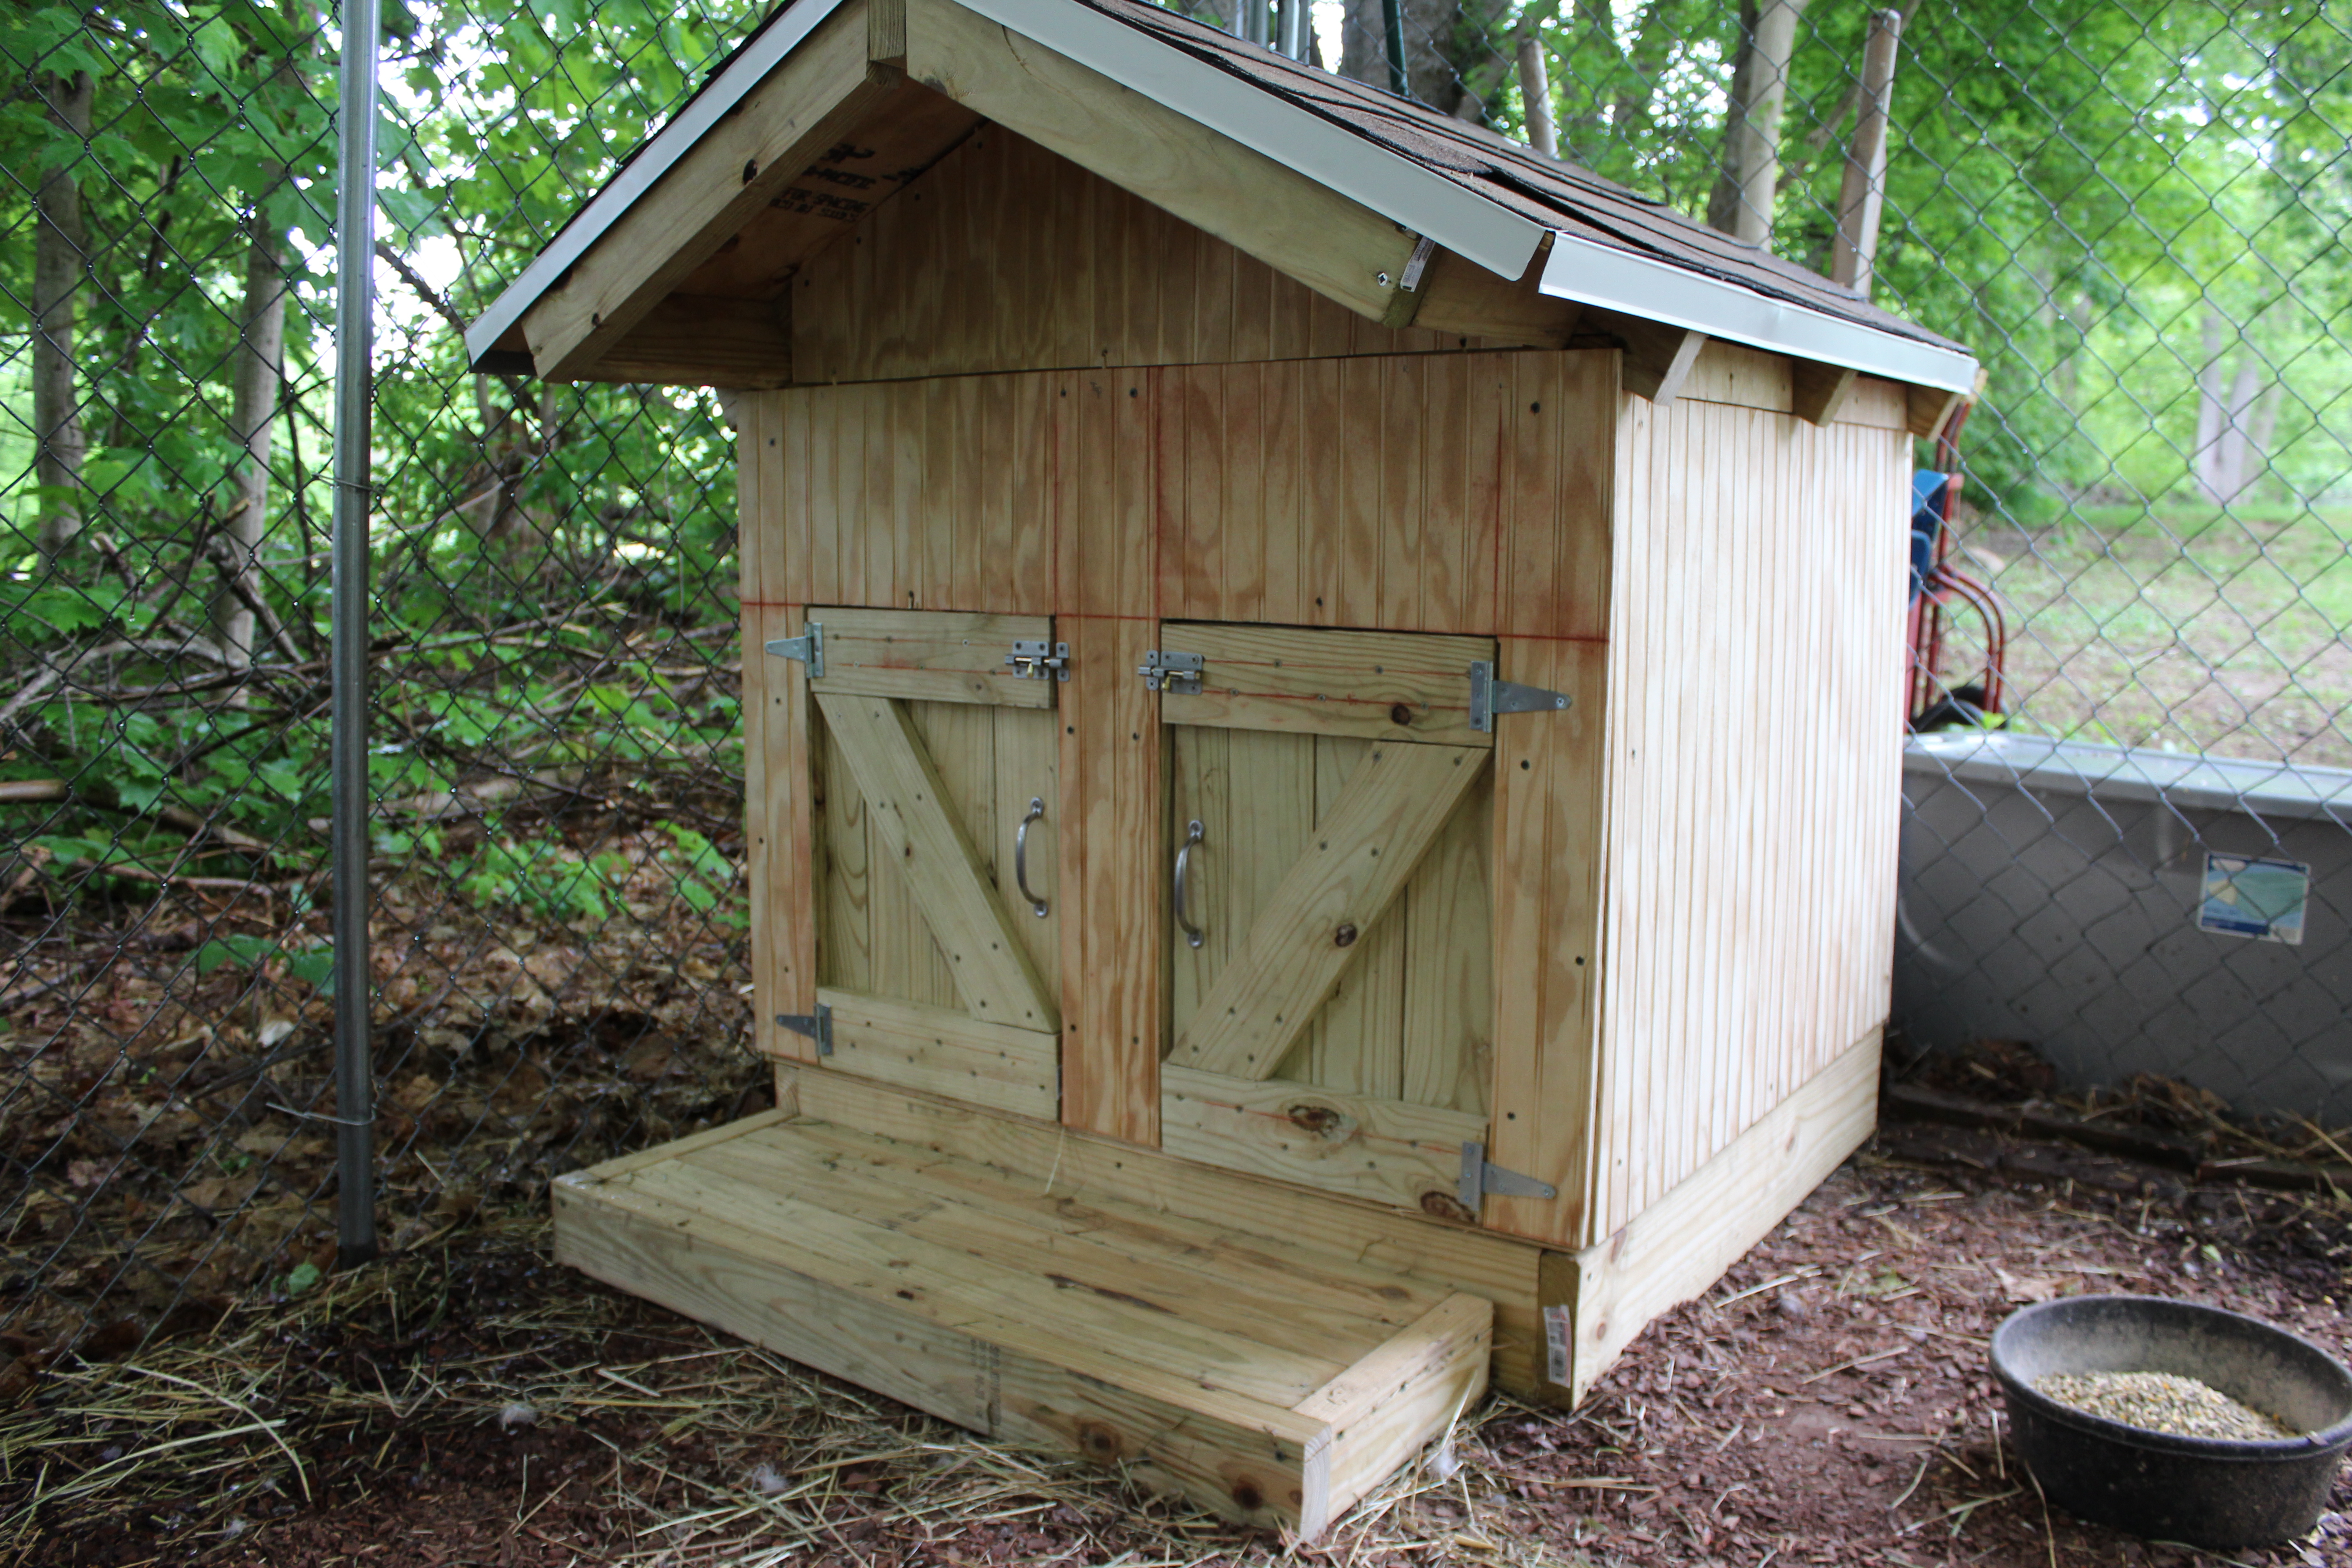 My Muscovy duck house, two separate entrances for drake and duck to avoid over mating in night hours. Built by my boyfriend Alex!